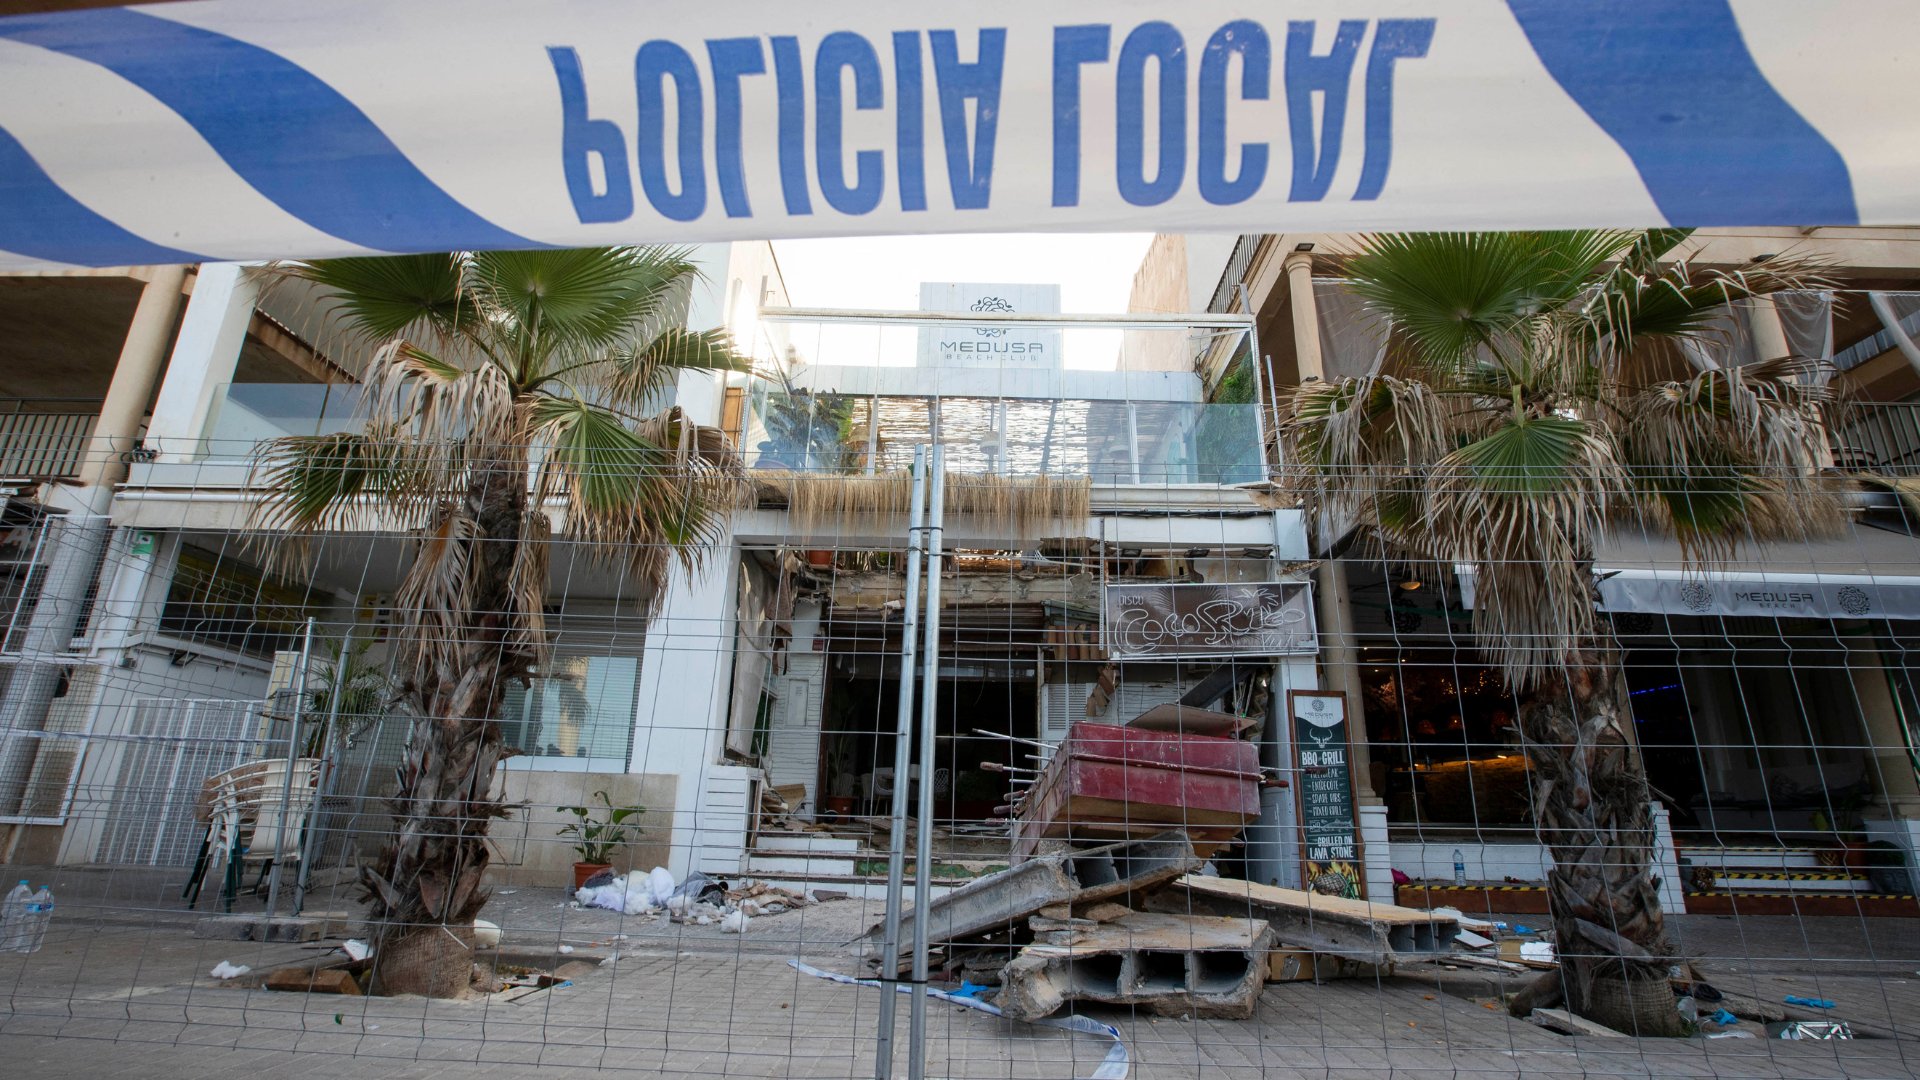 The collapse of the two-story restaurant in Playa de Palma, Mallorca has killed four and injured 16. /Jaime Reina/AFP